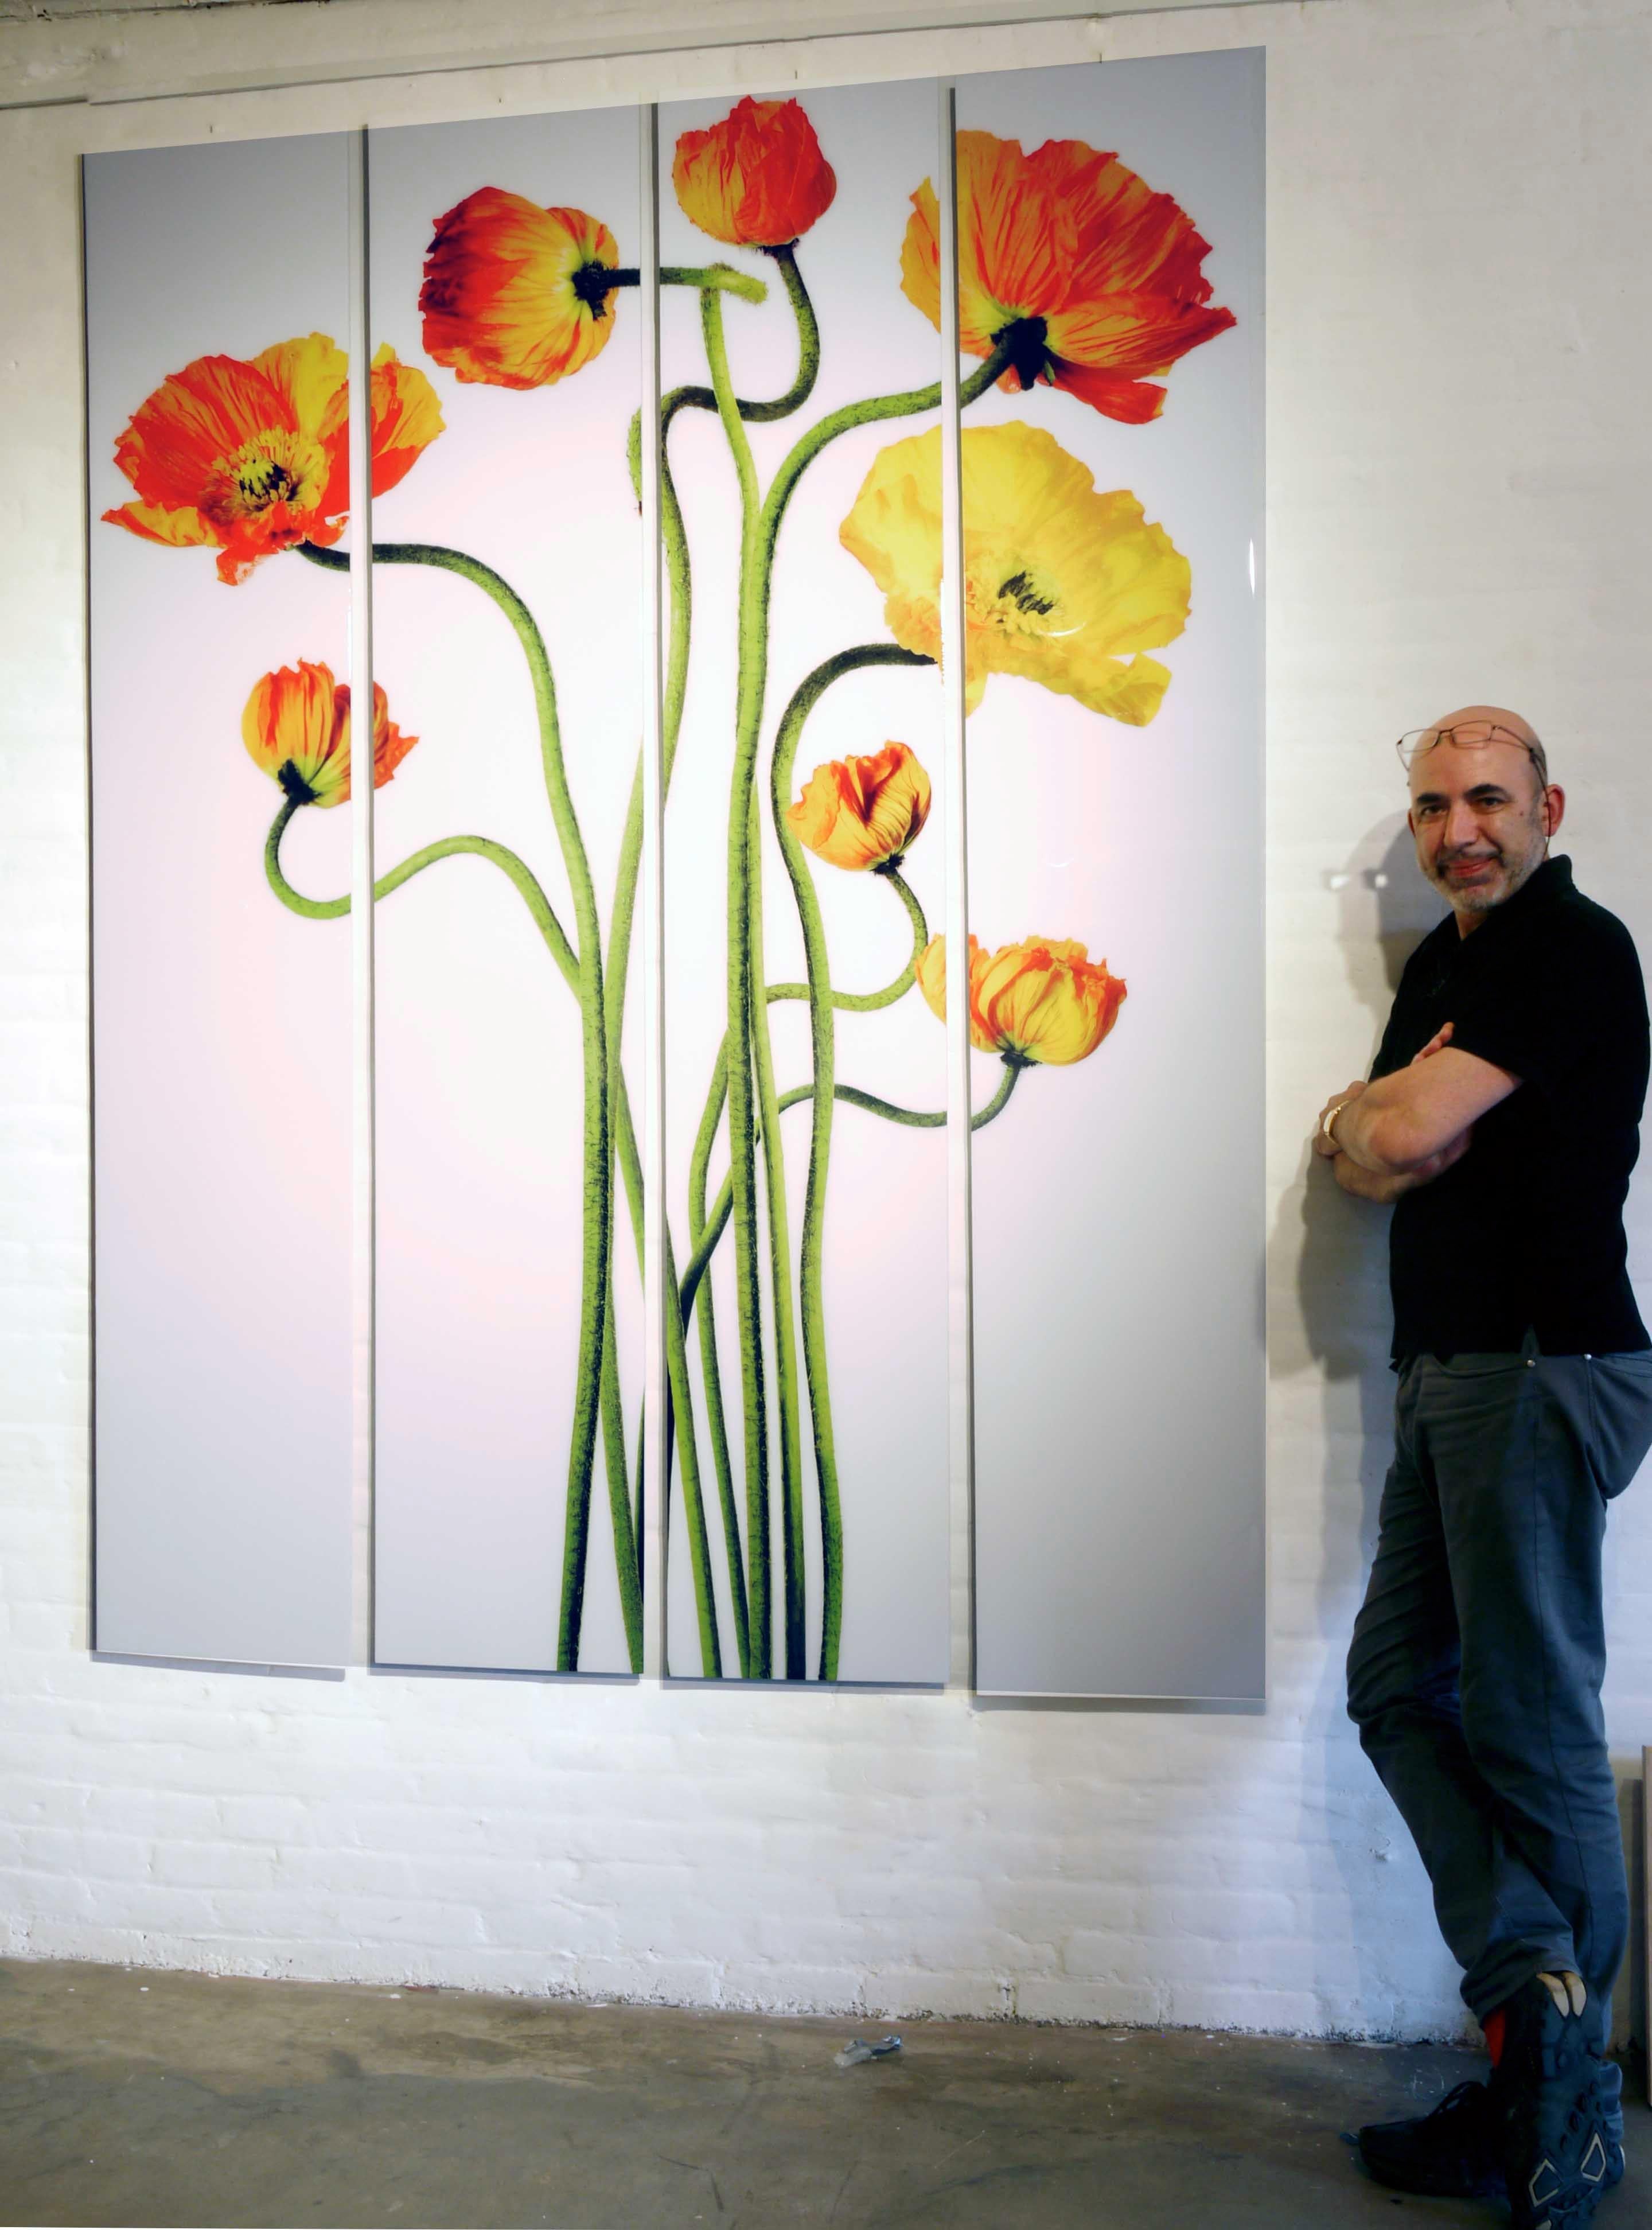 This is a large scale Diptych : 2 x (70 x 12 